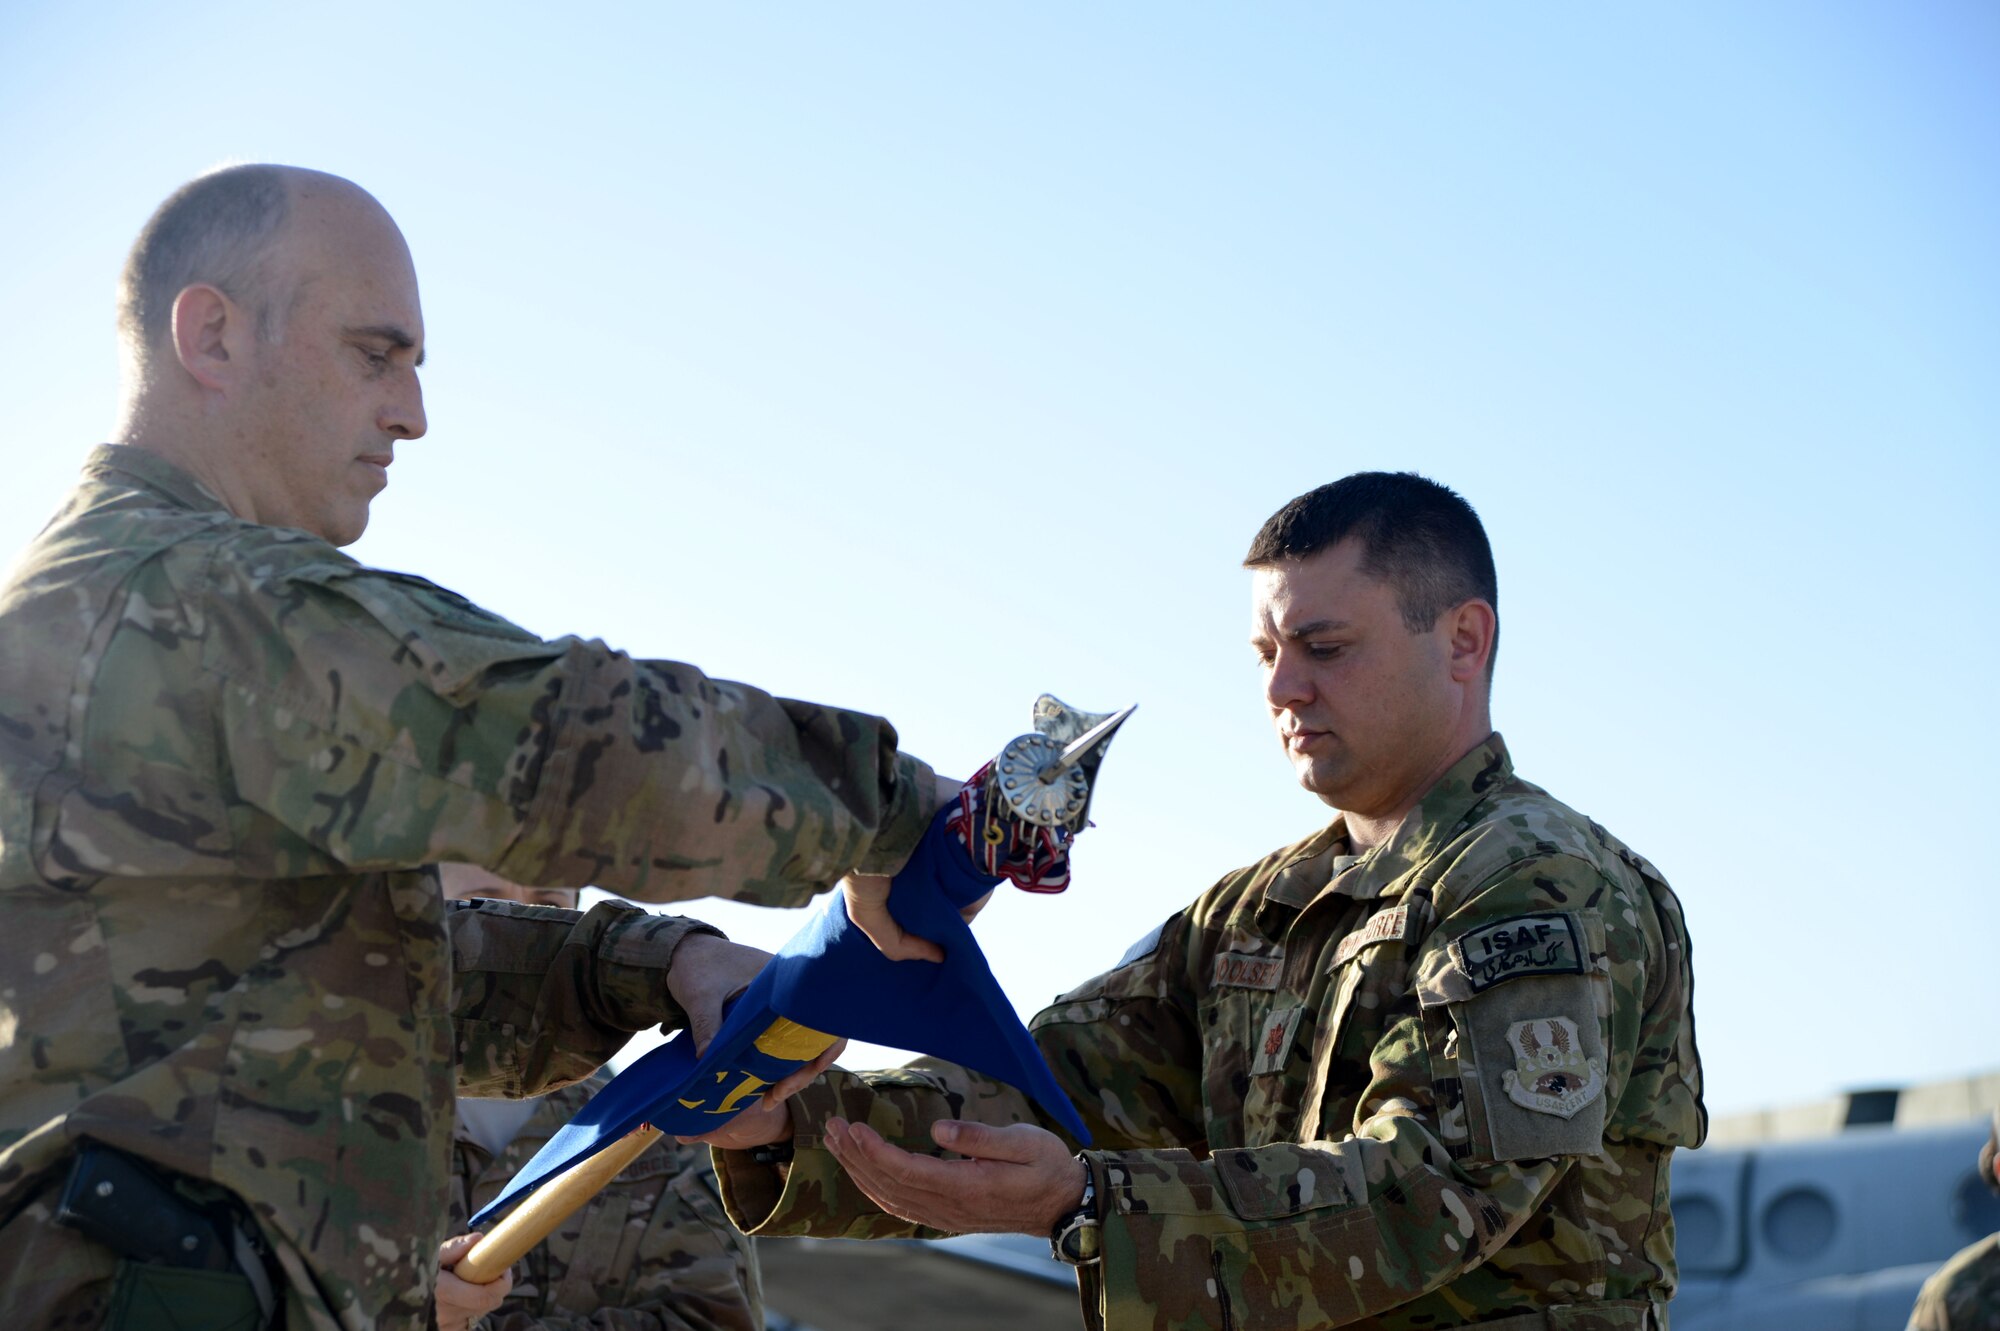 U.S. Air Force Col. Jon Wilkinson, 455th Expeditionary Operations Group commander works with Maj. Tanner Woolsey, 4th Expeditionary Reconnaissance Squadron commander, to roll the squadron’s guidon before sheathing it during the 4 ERS transition of authority ceremony at Bagram Airfield, Afghanistan Oct. 1, 2014. With the inactivation of 4 ERS, Joint Task Force Thor is now the lead for the MC-12W mission in Afghanistan. (U.S. Air Force photo by Master Sgt. Cohen A. Young/Released)